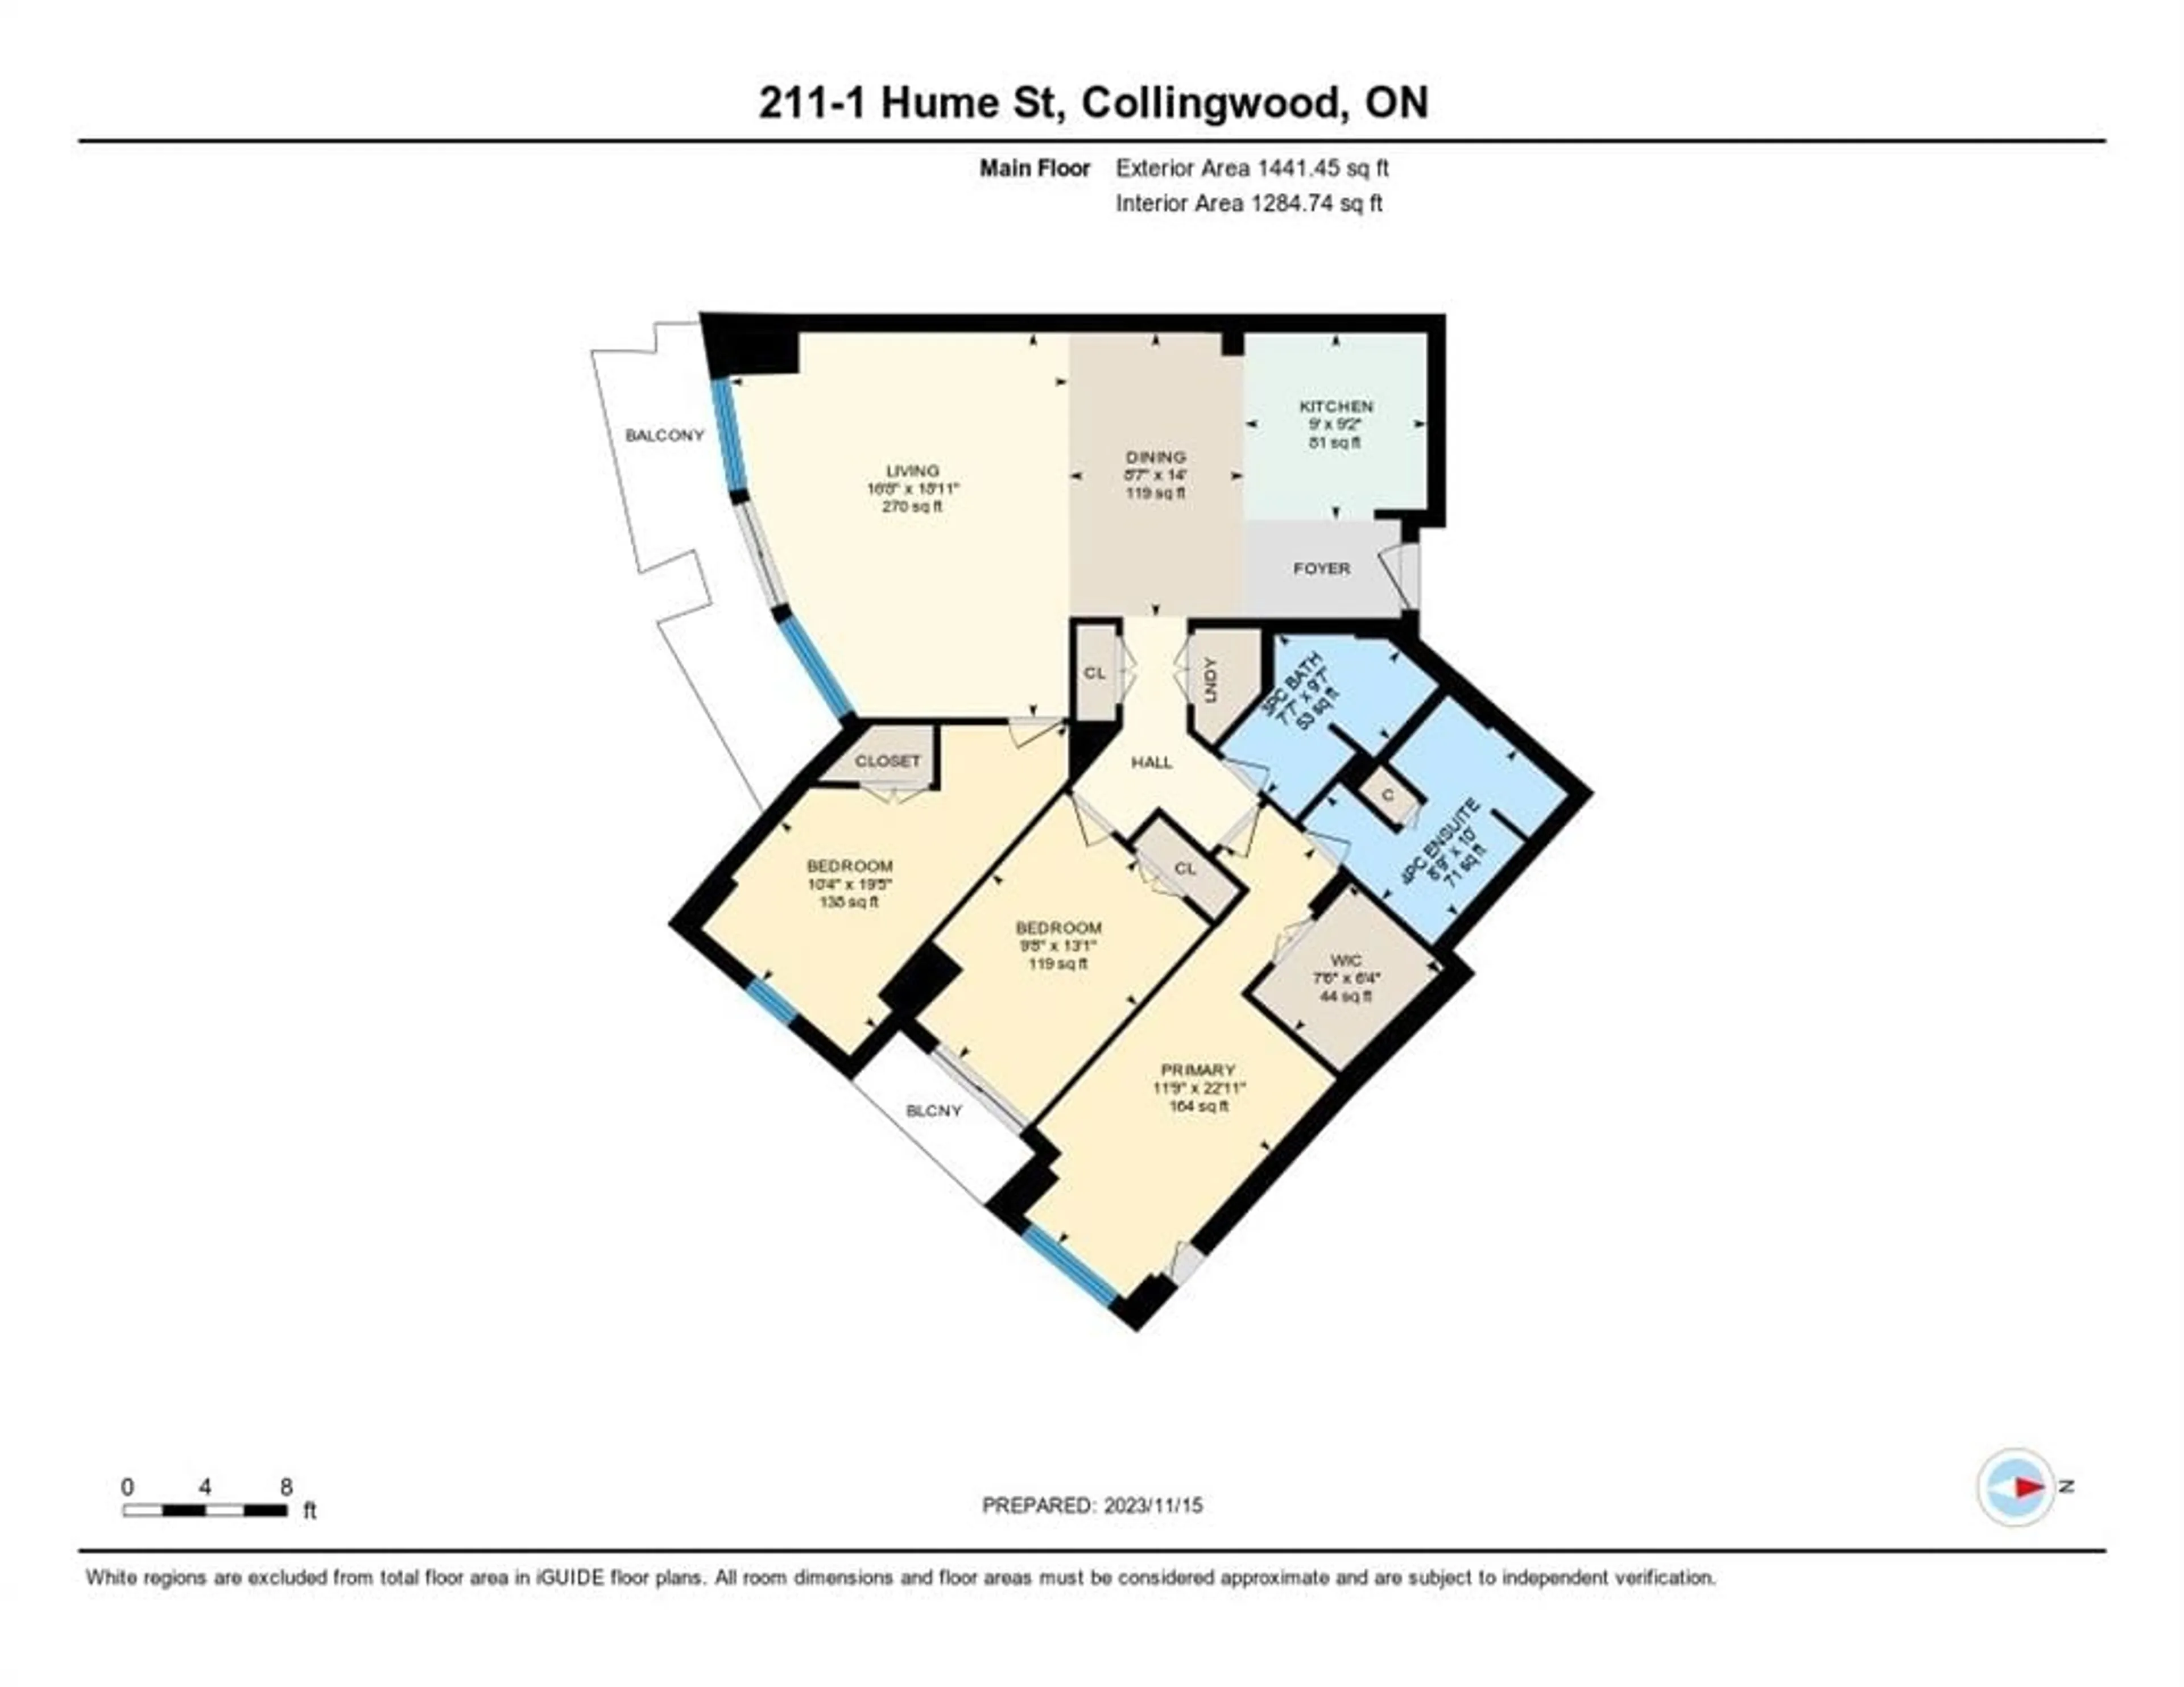 Floor plan for 1 Hume St #211, Collingwood Ontario L9Y 0X3